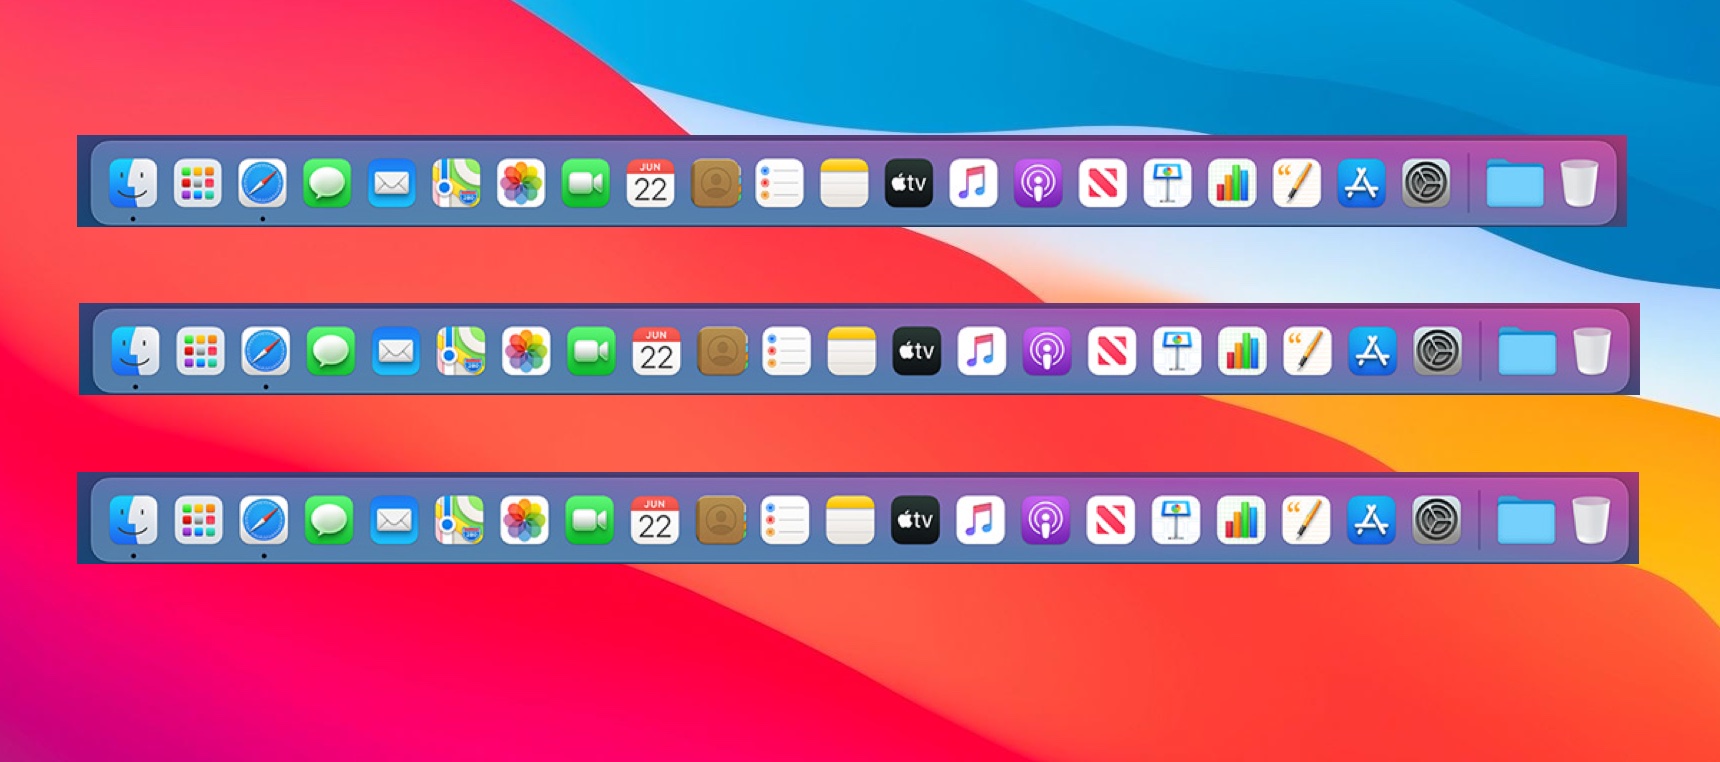 Can I Show the Dock on All Screens on Mac? Moving the Dock in MacOS